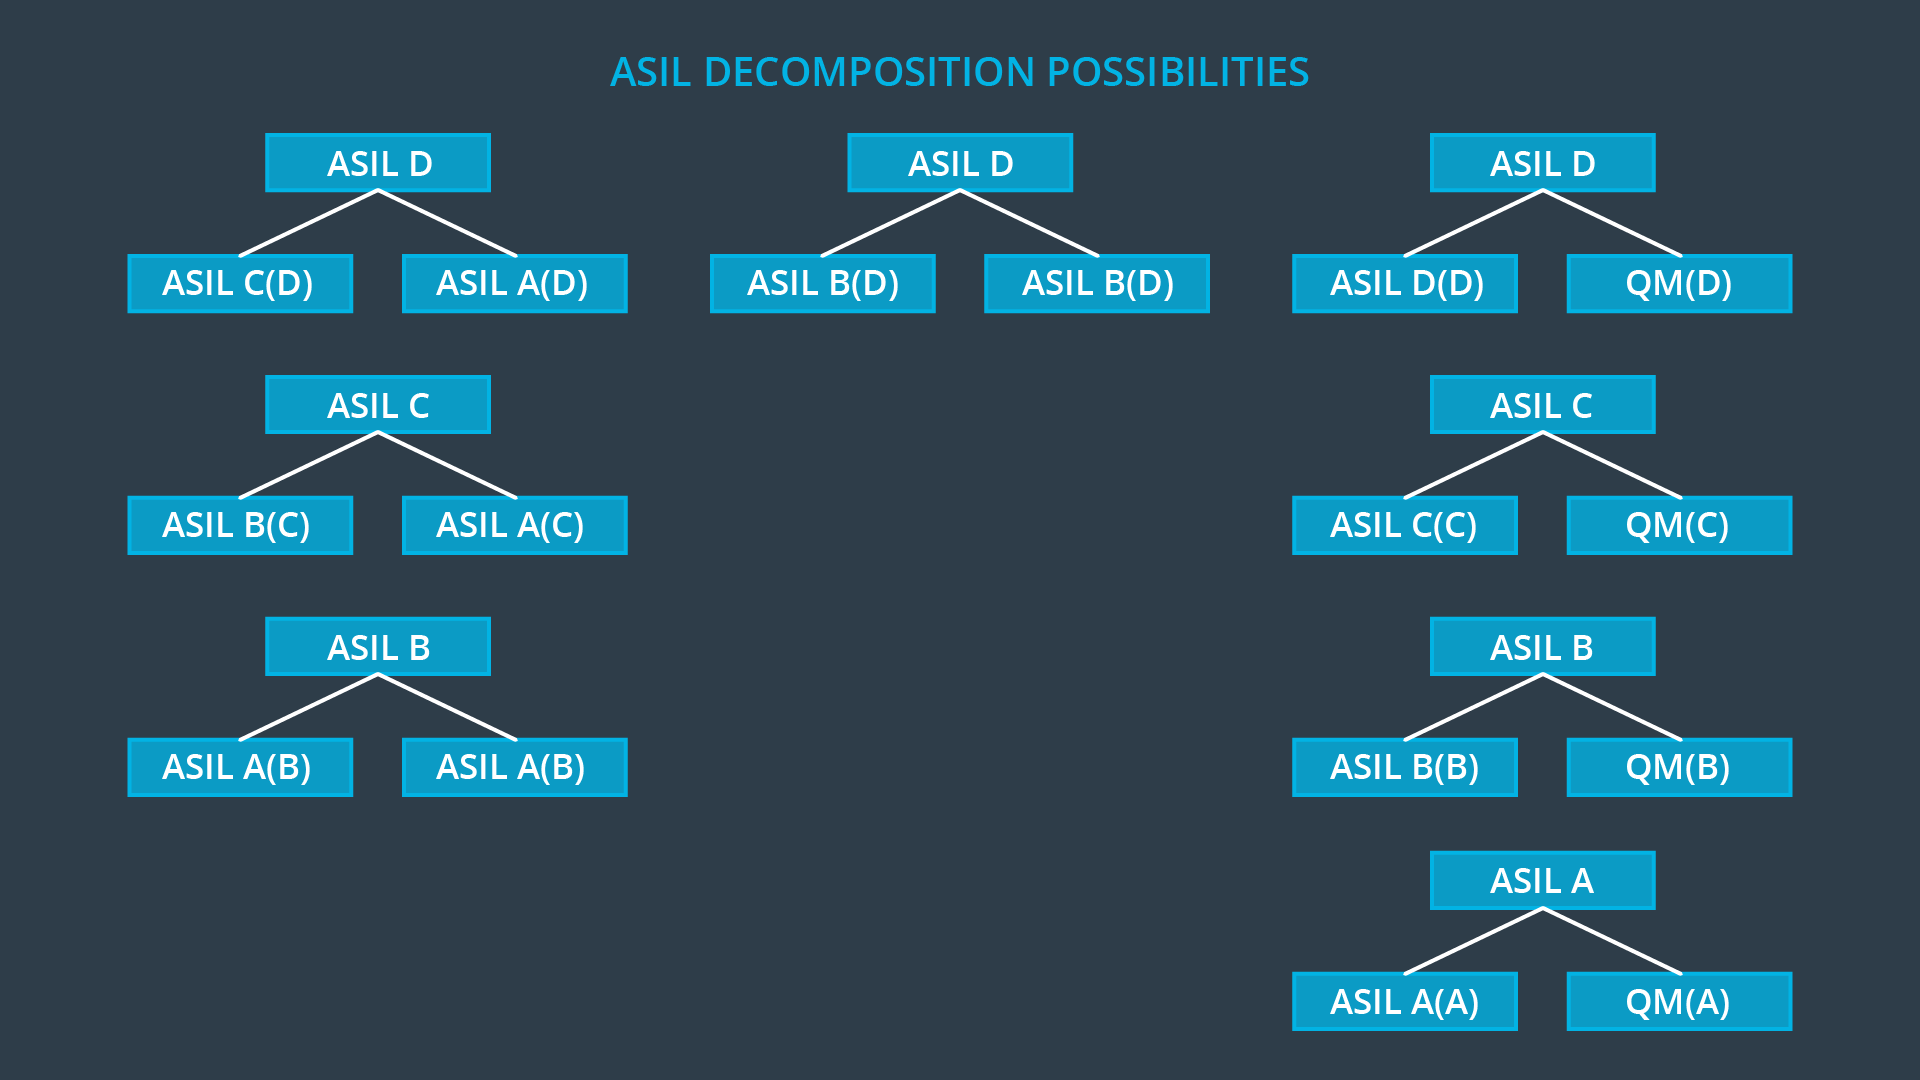 Possible ASIL Decompositions